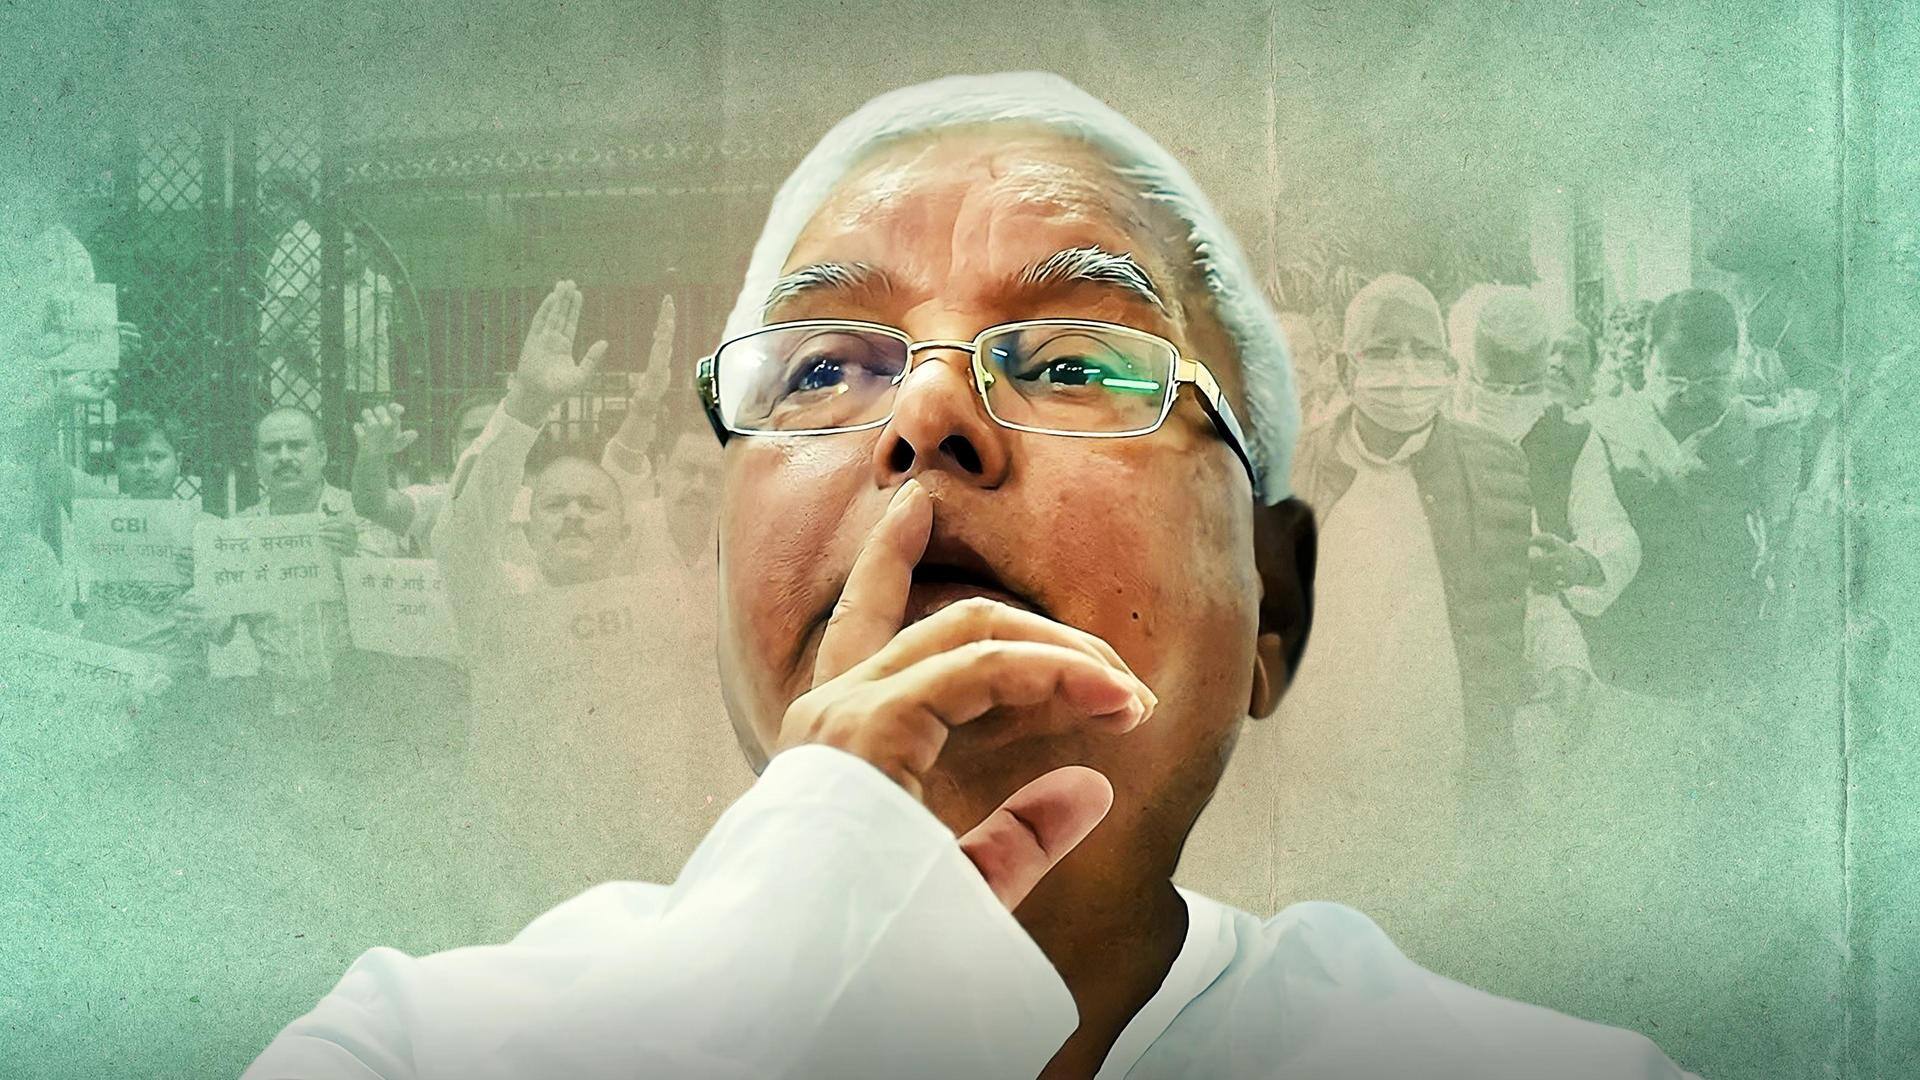 Land-for-jobs scam: Lalu Yadav, family's assets worth Rs. 6cr seized